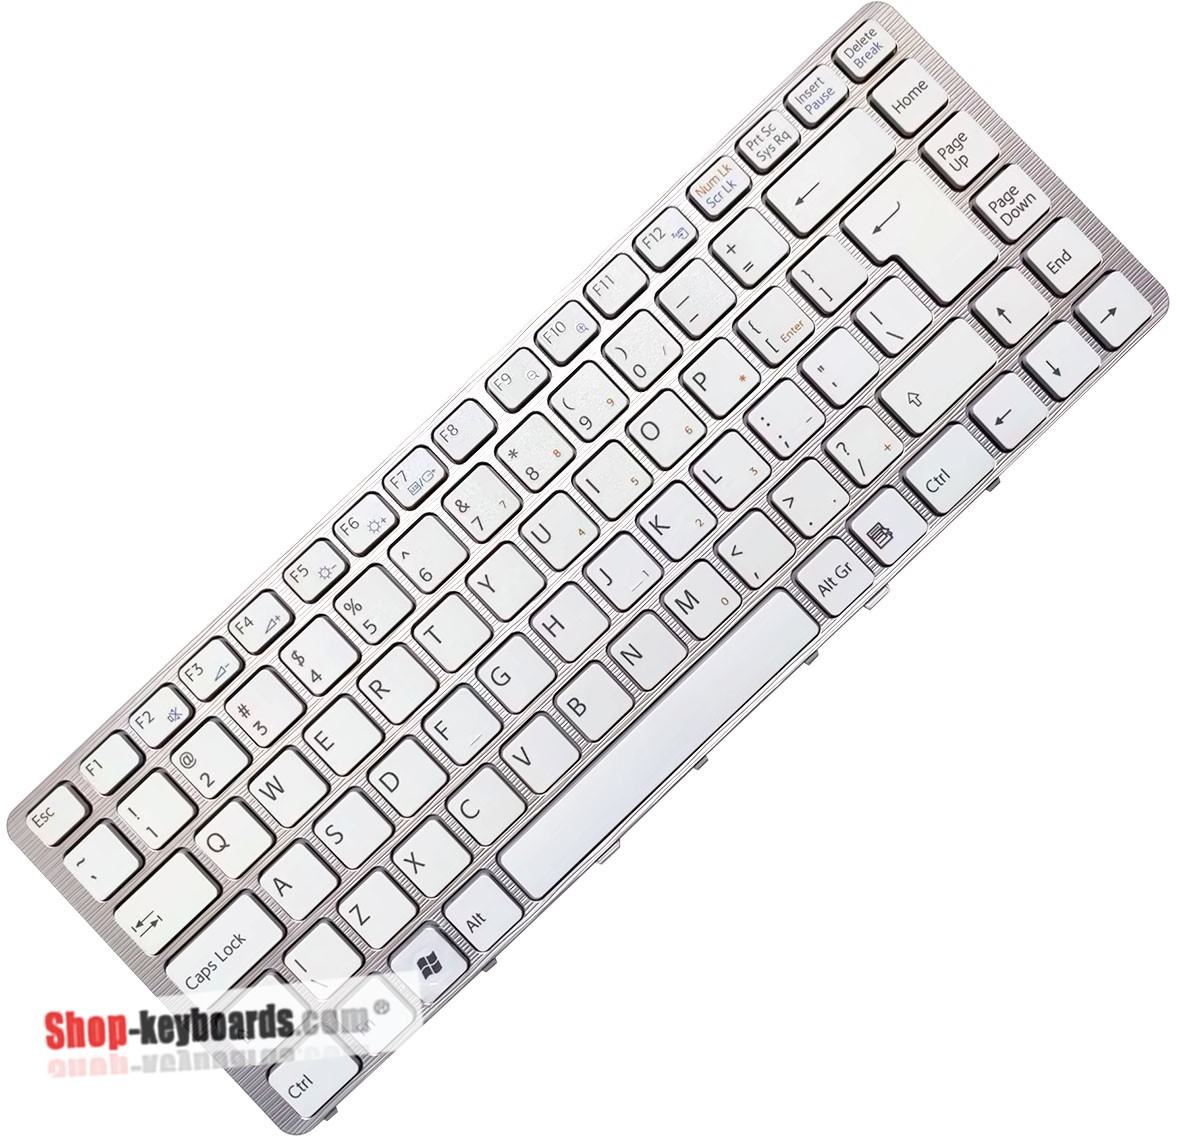 Sony Vaio VGN-NW220F/T  Keyboard replacement